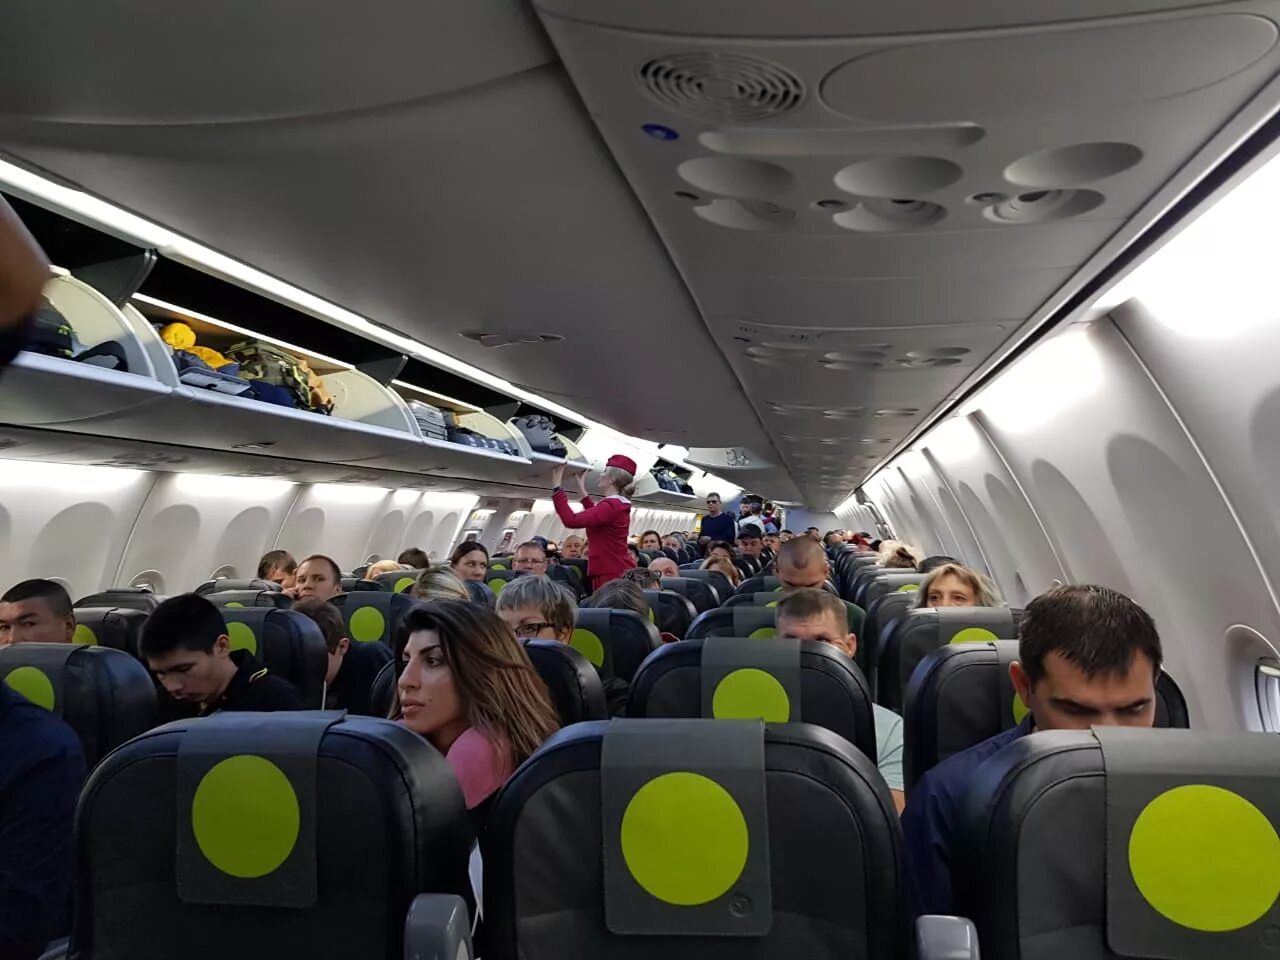 S7 airlines места. S7 Airlines внутри самолета. Самолёт s7 Airlines салон. S7 Airlines Толмачево. S7 Airlines Новосибирск.